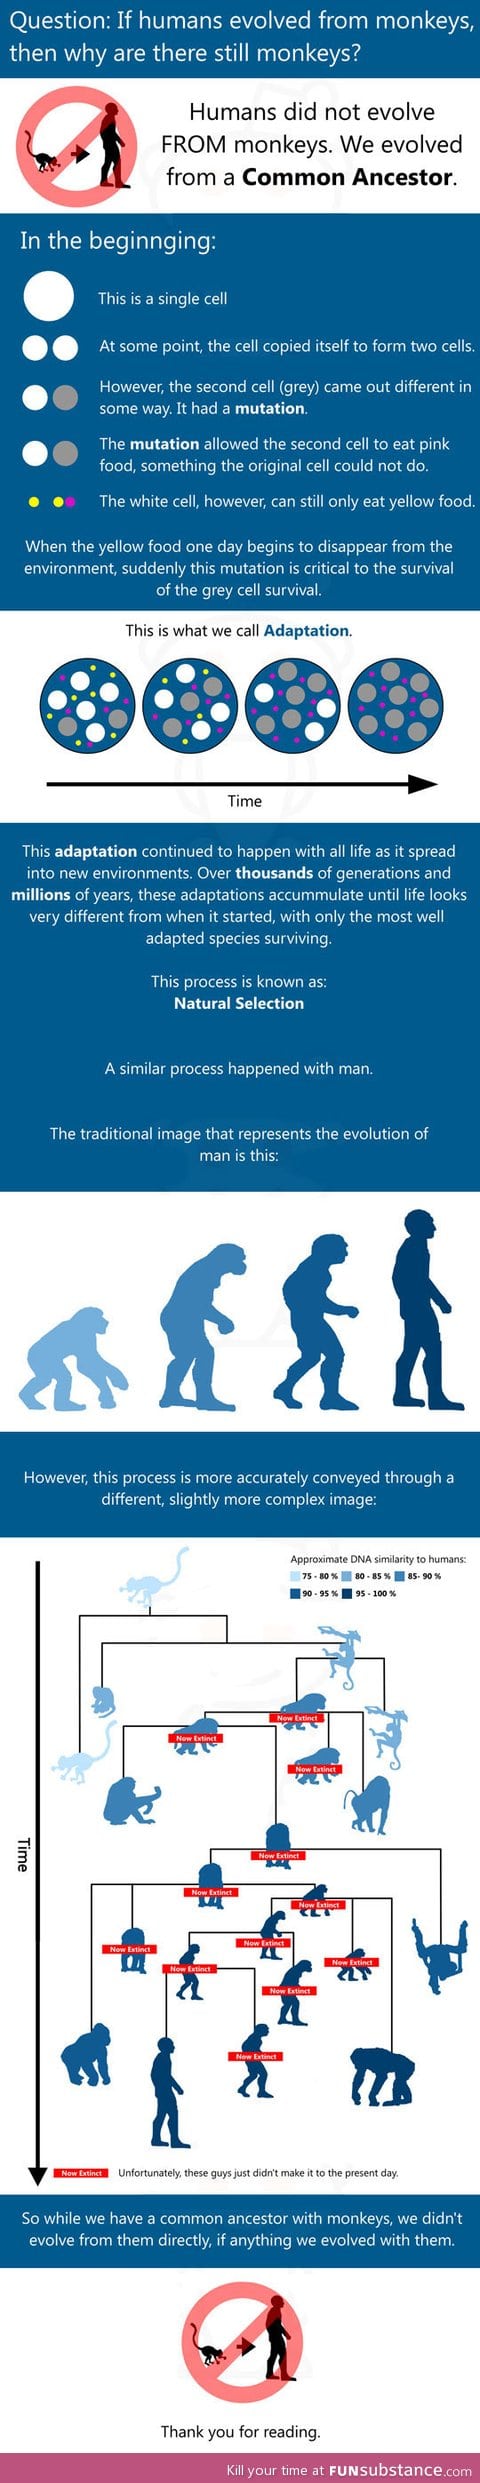 Humans Did Not Evolve From Monkeys